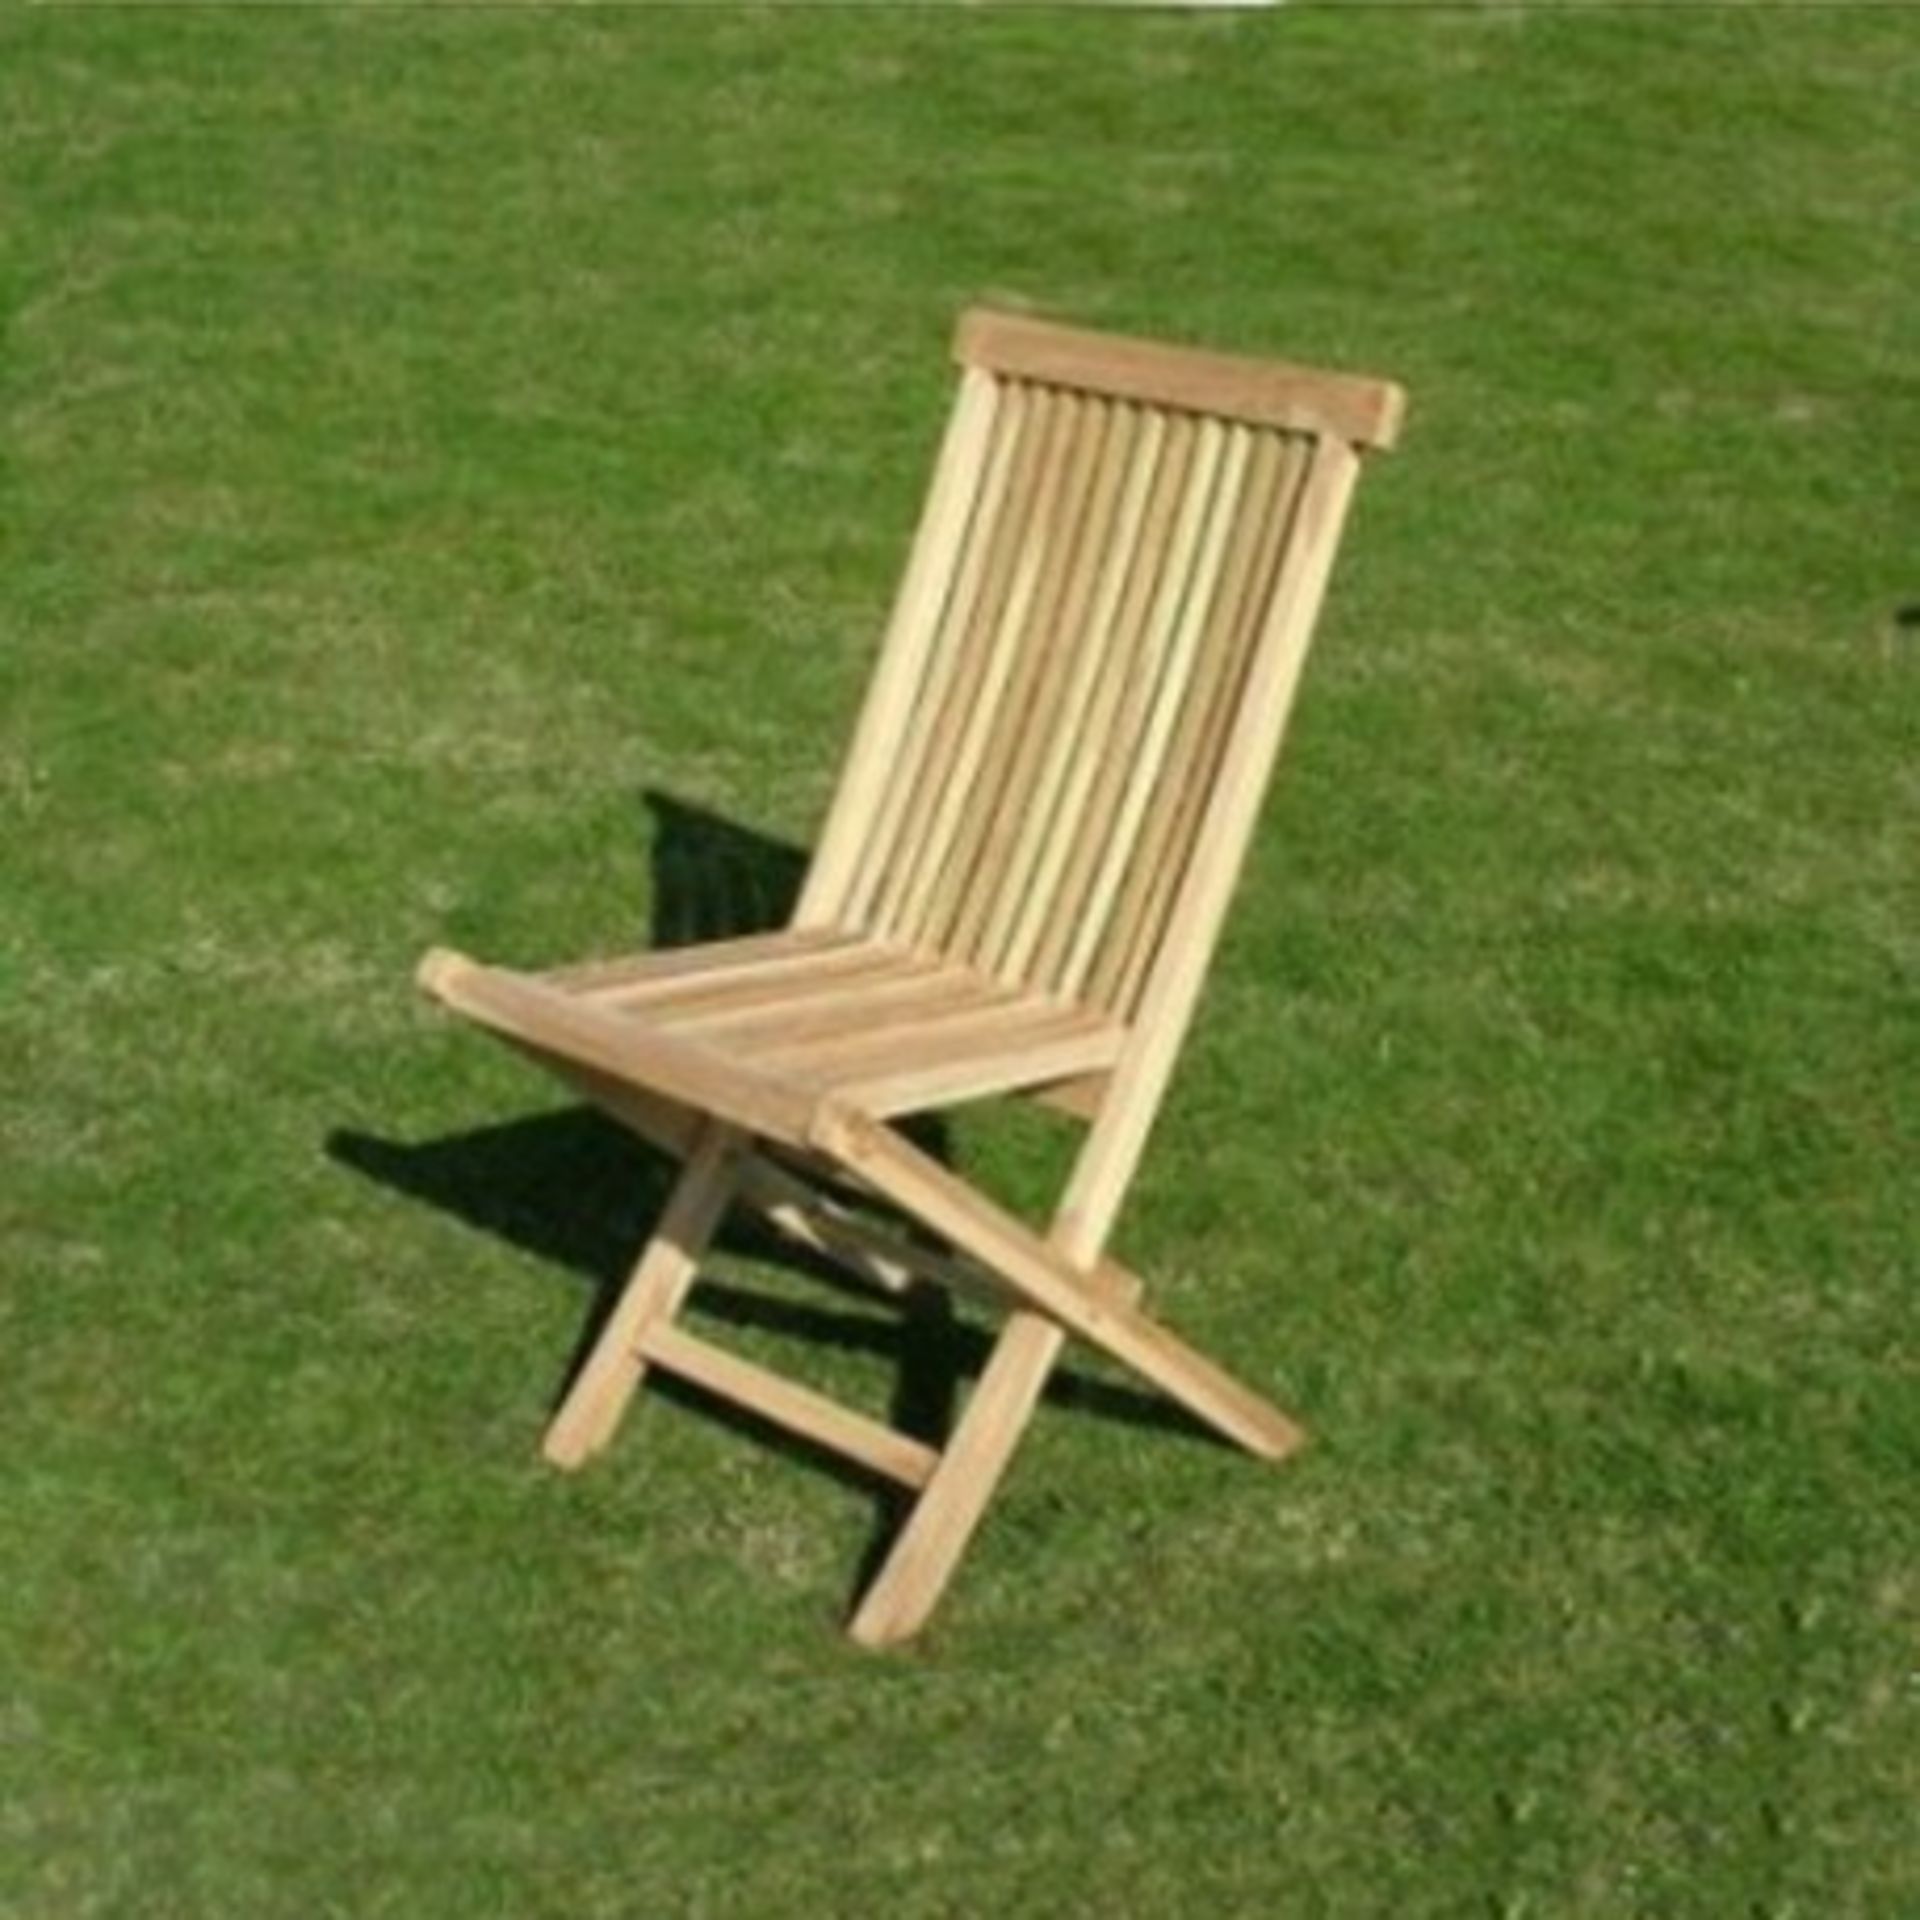 V Brand New Teak folding chair Sit NOTE: Item is Available Approx 5 Days From The End Of The Sale